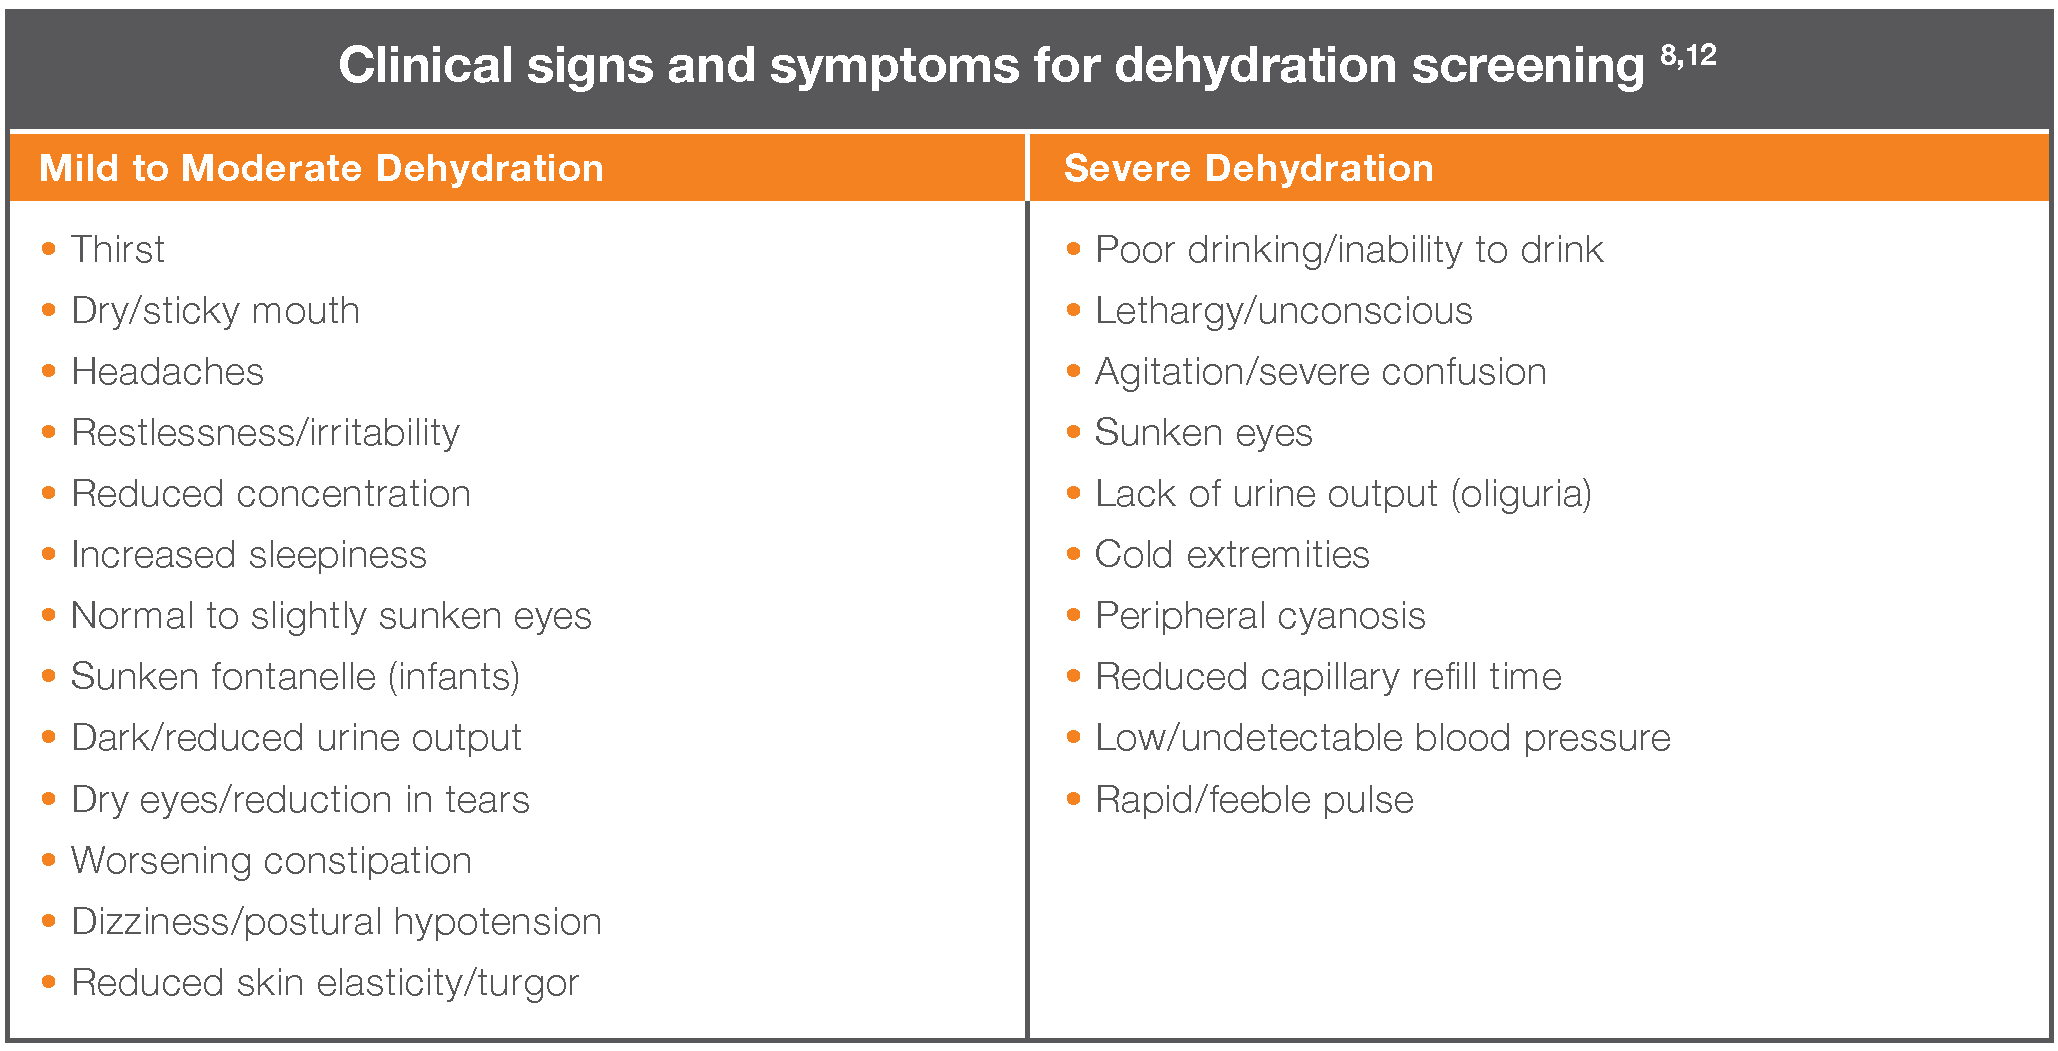 Clinical signs and symptoms for dehydration screening